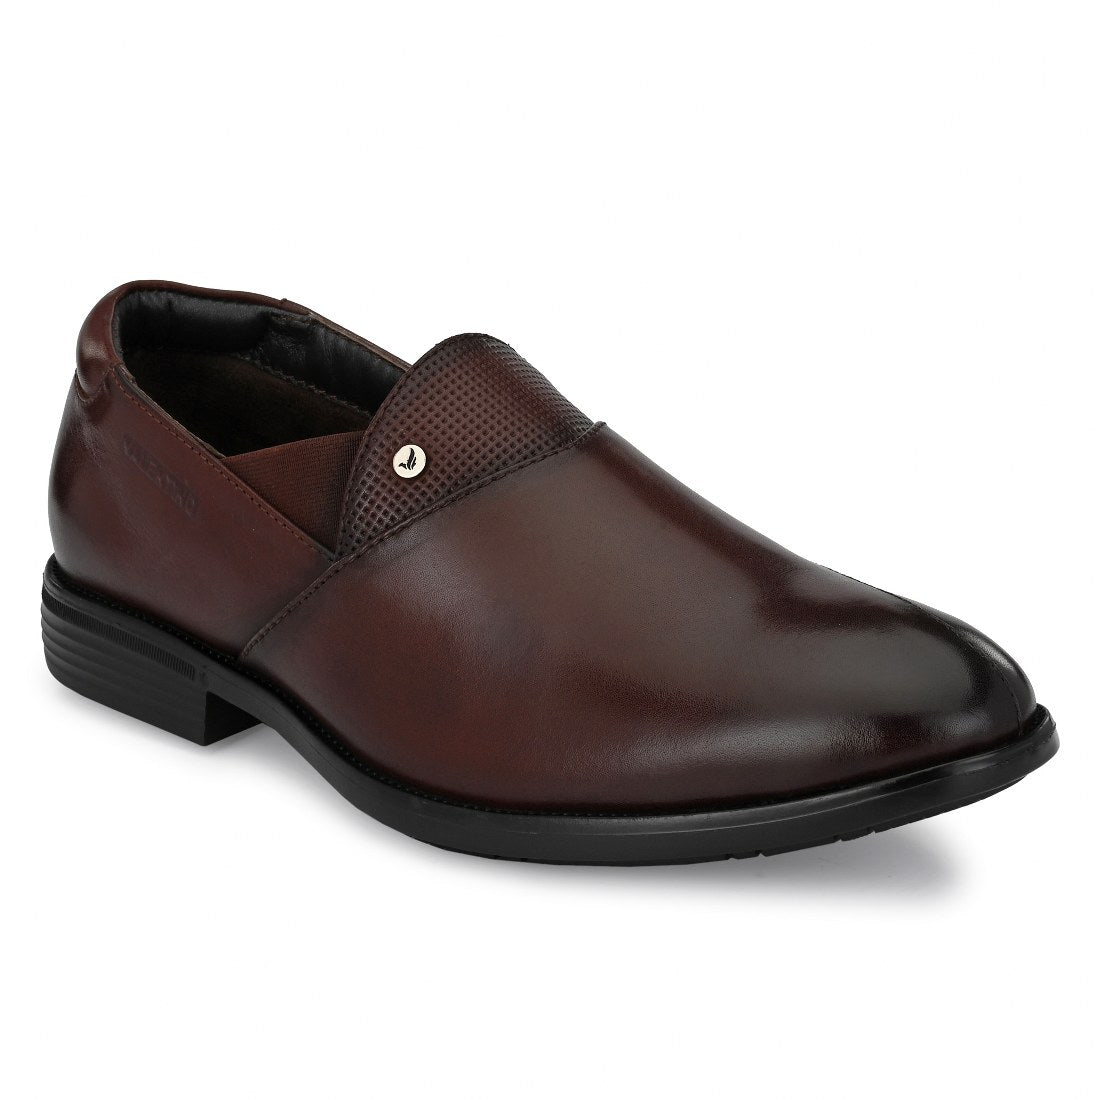 COSMO-14 MEN LEATHER BROWN FORMAL SLIP ON MOCCASSINS